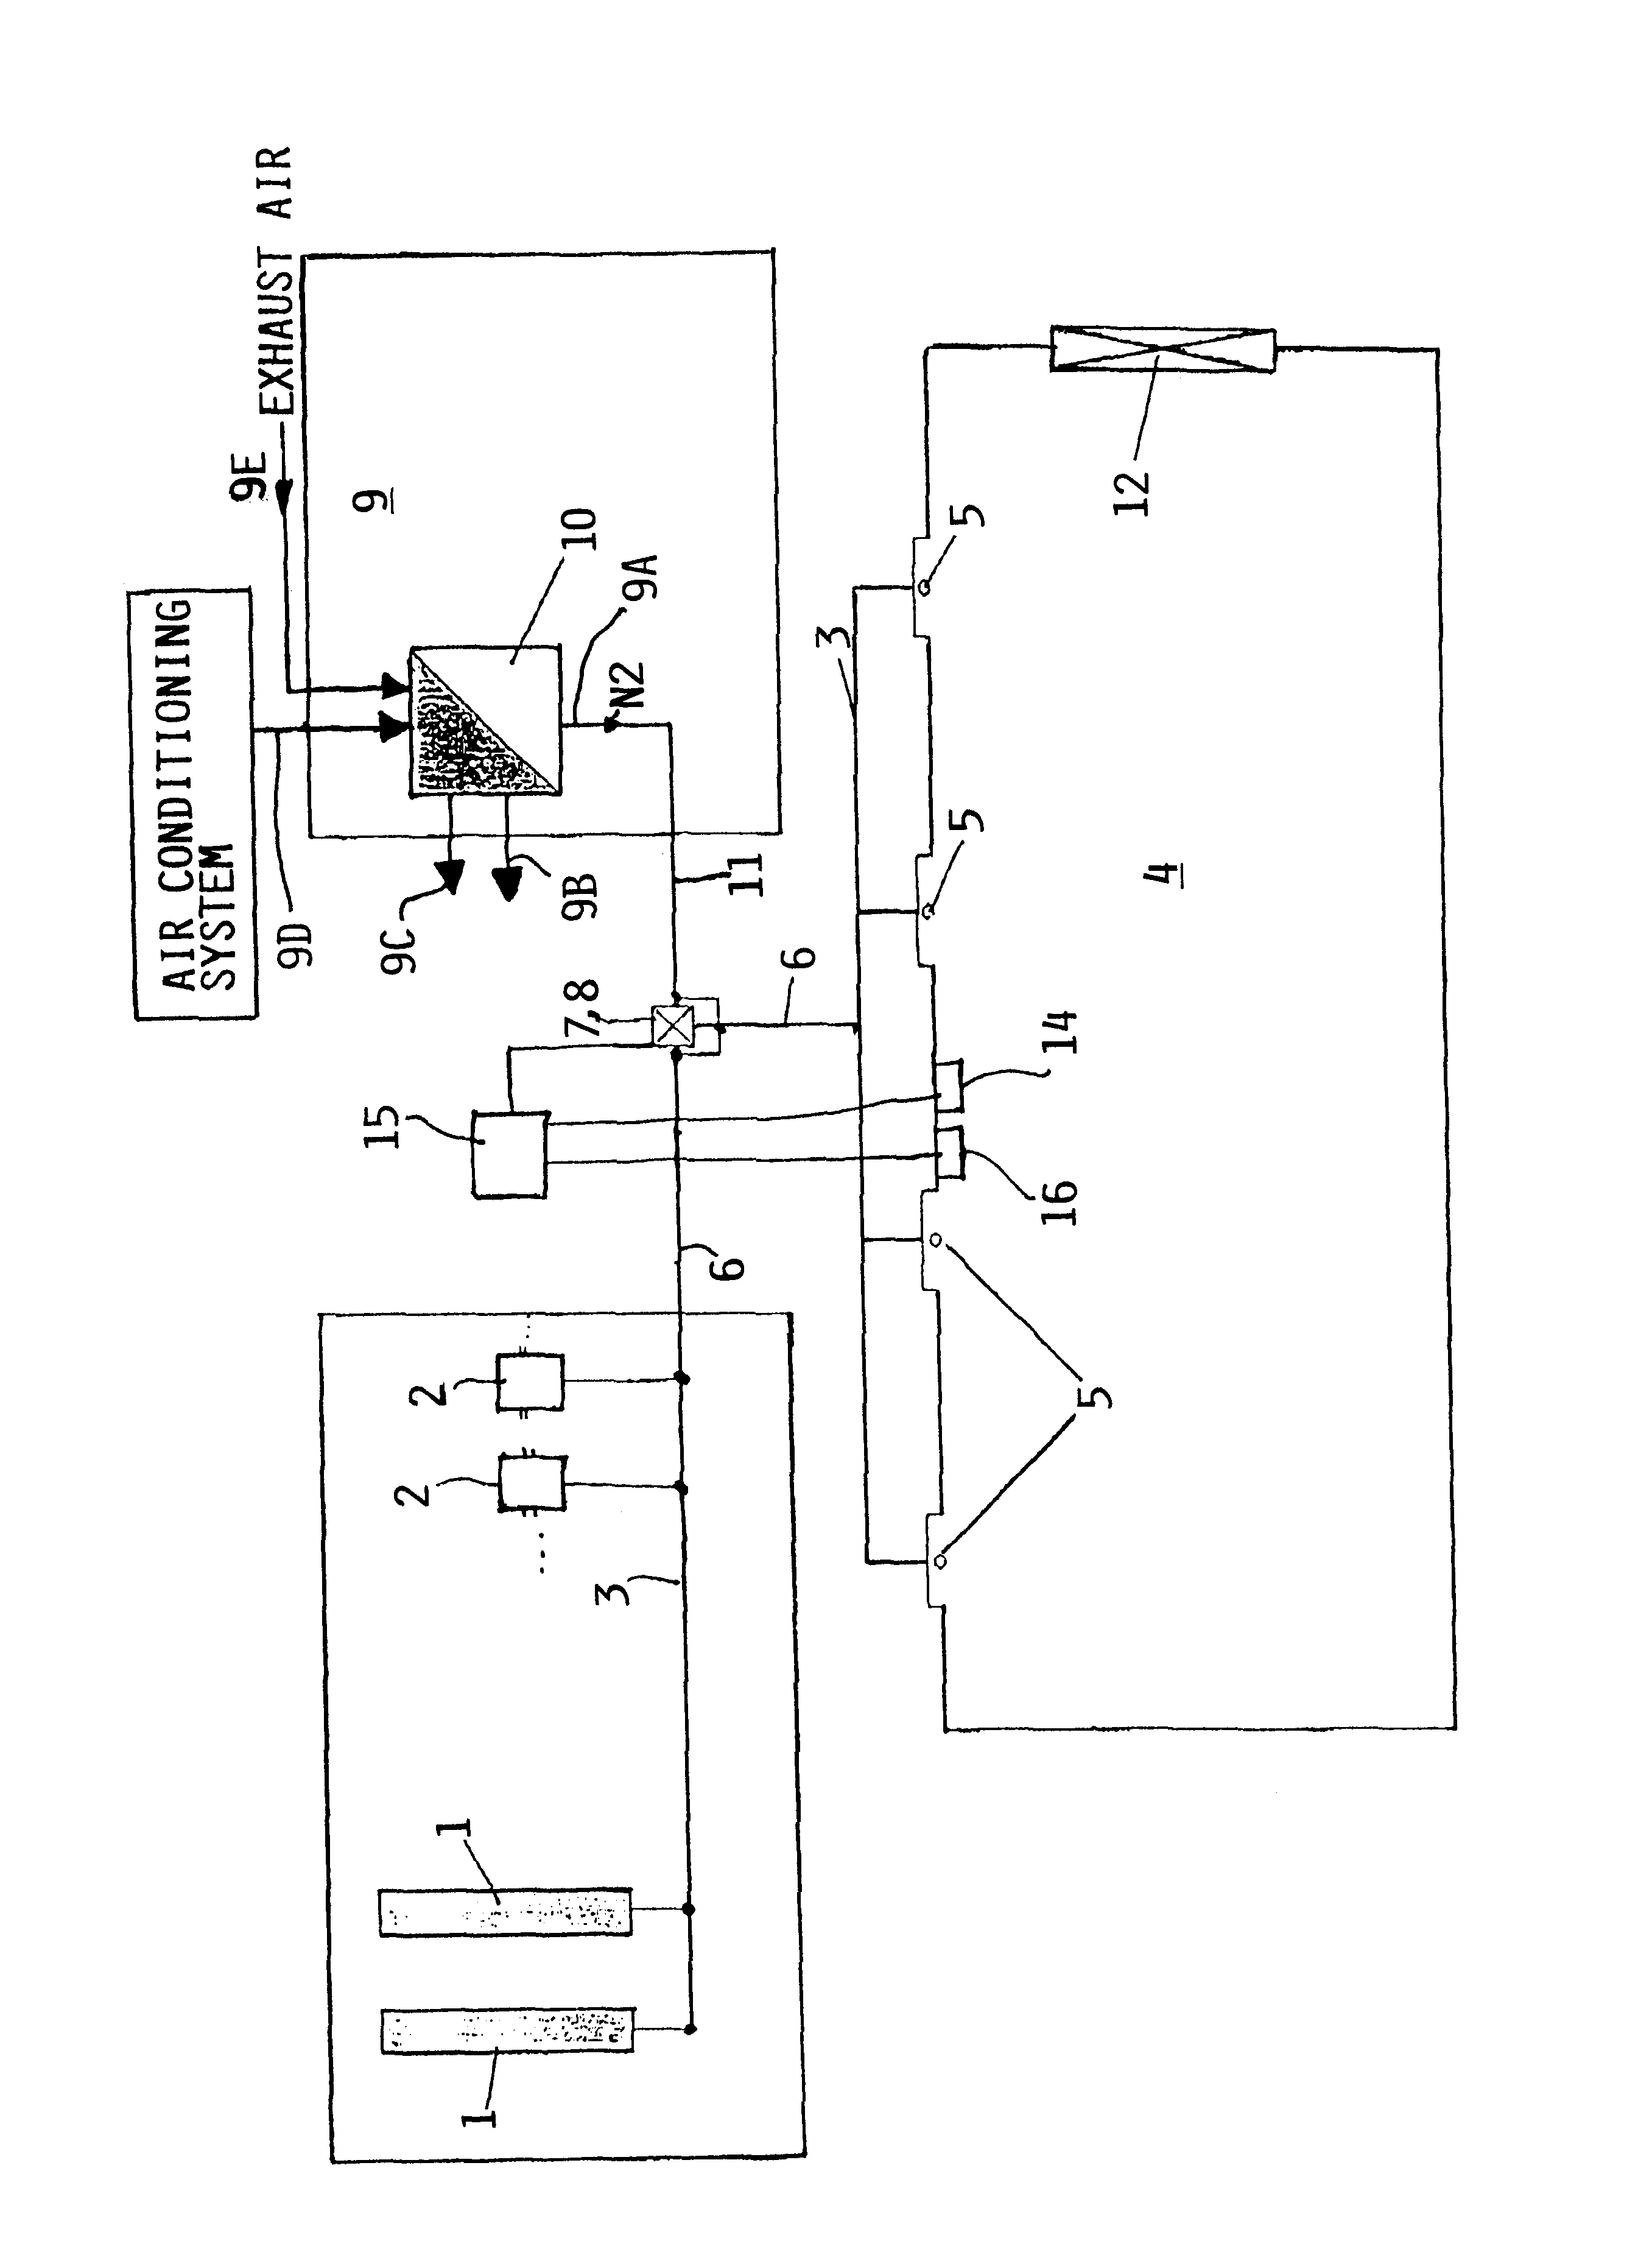 Method and system for extinguishing fire in an enclosed space